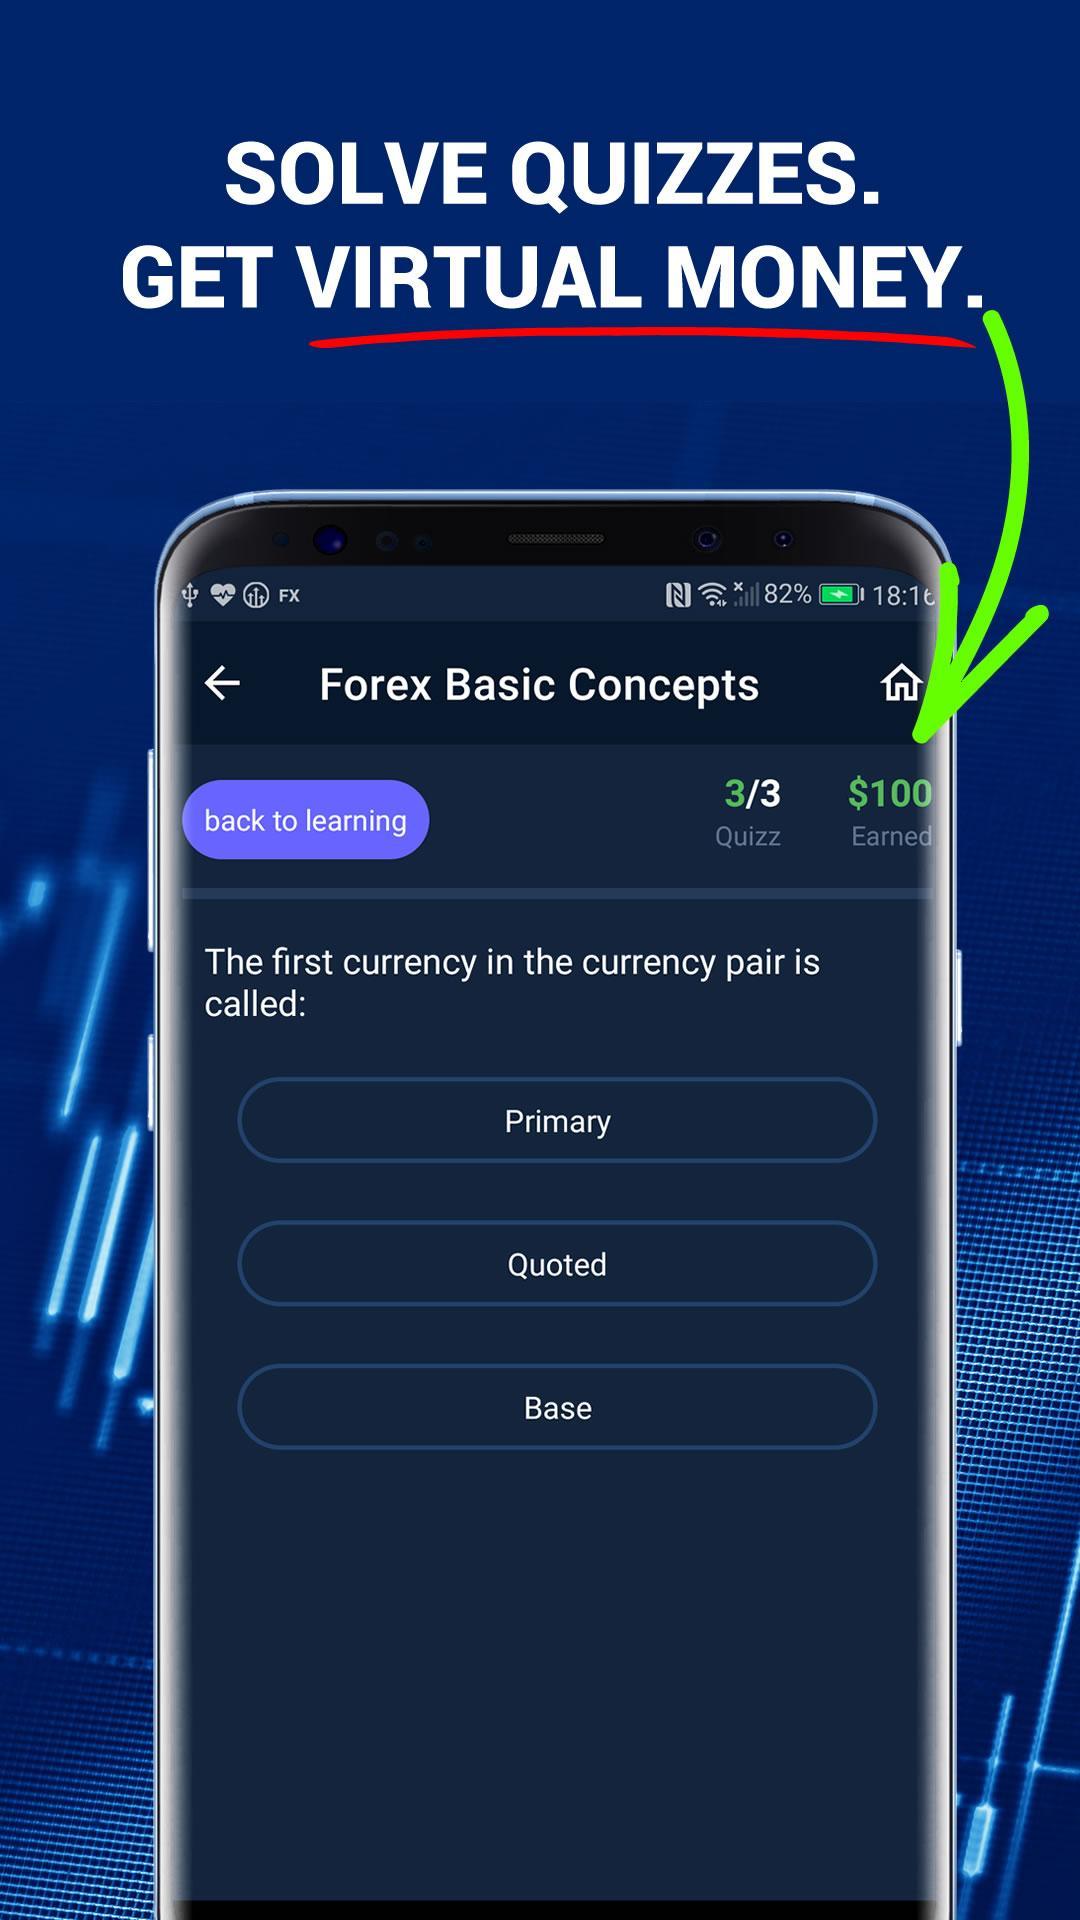 Forex training, Forex trading simulator for Android - APK ...